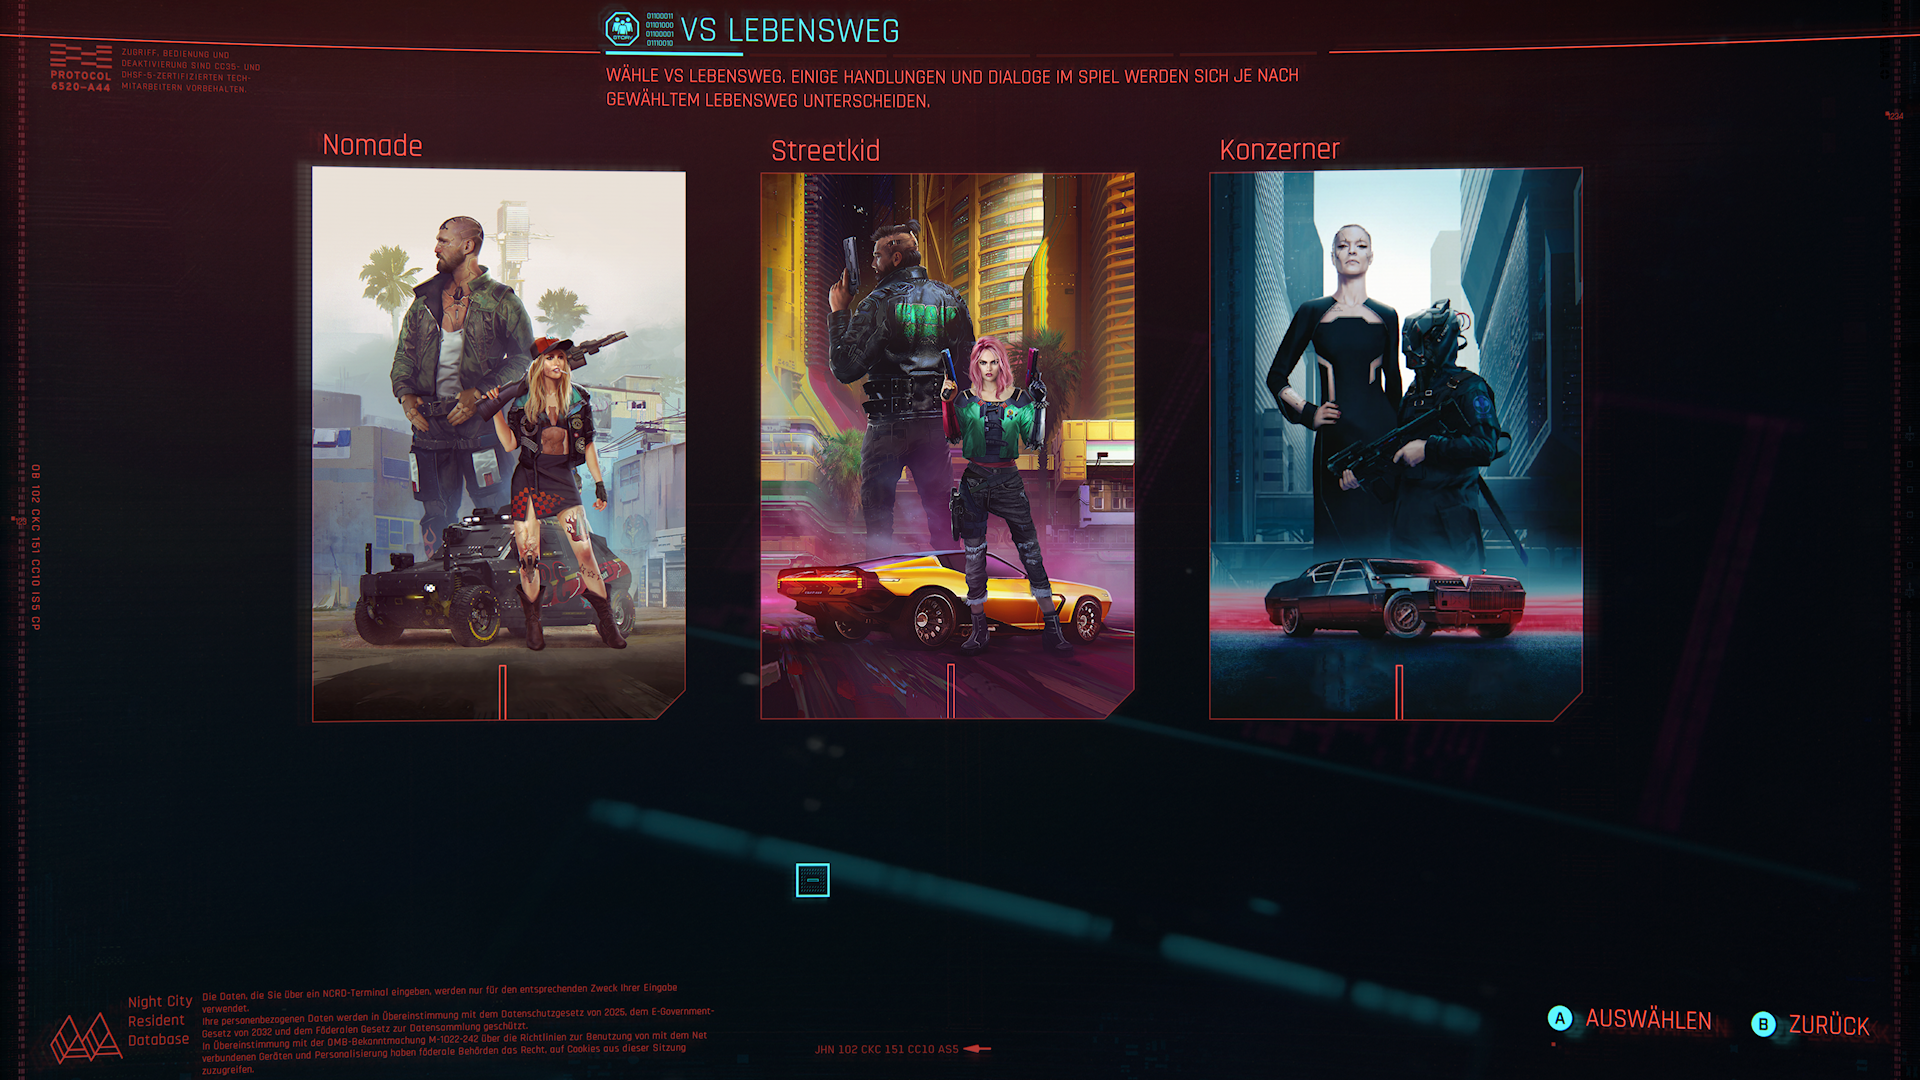 The choice of the former life path in Cyberpunk 2077